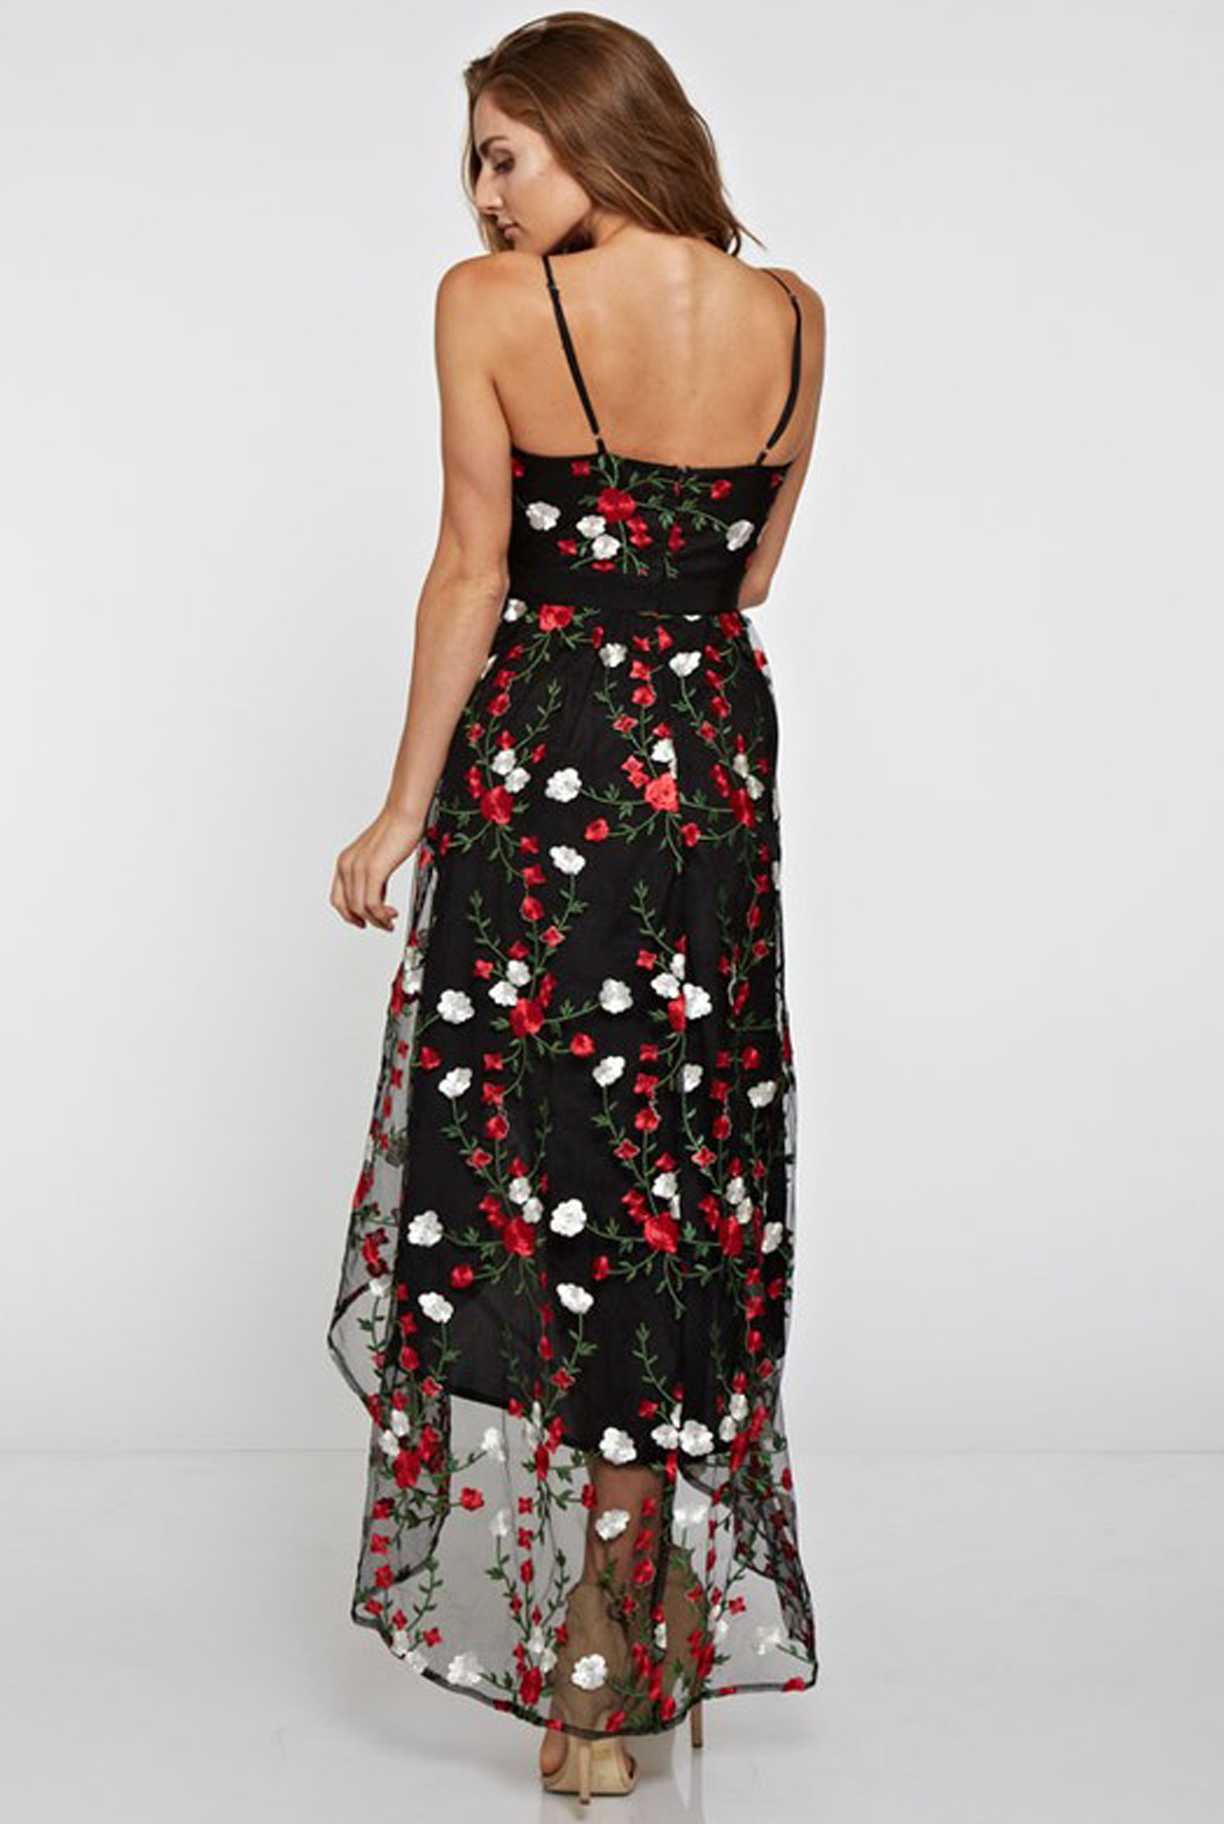 'Coming Up Roses' Dress